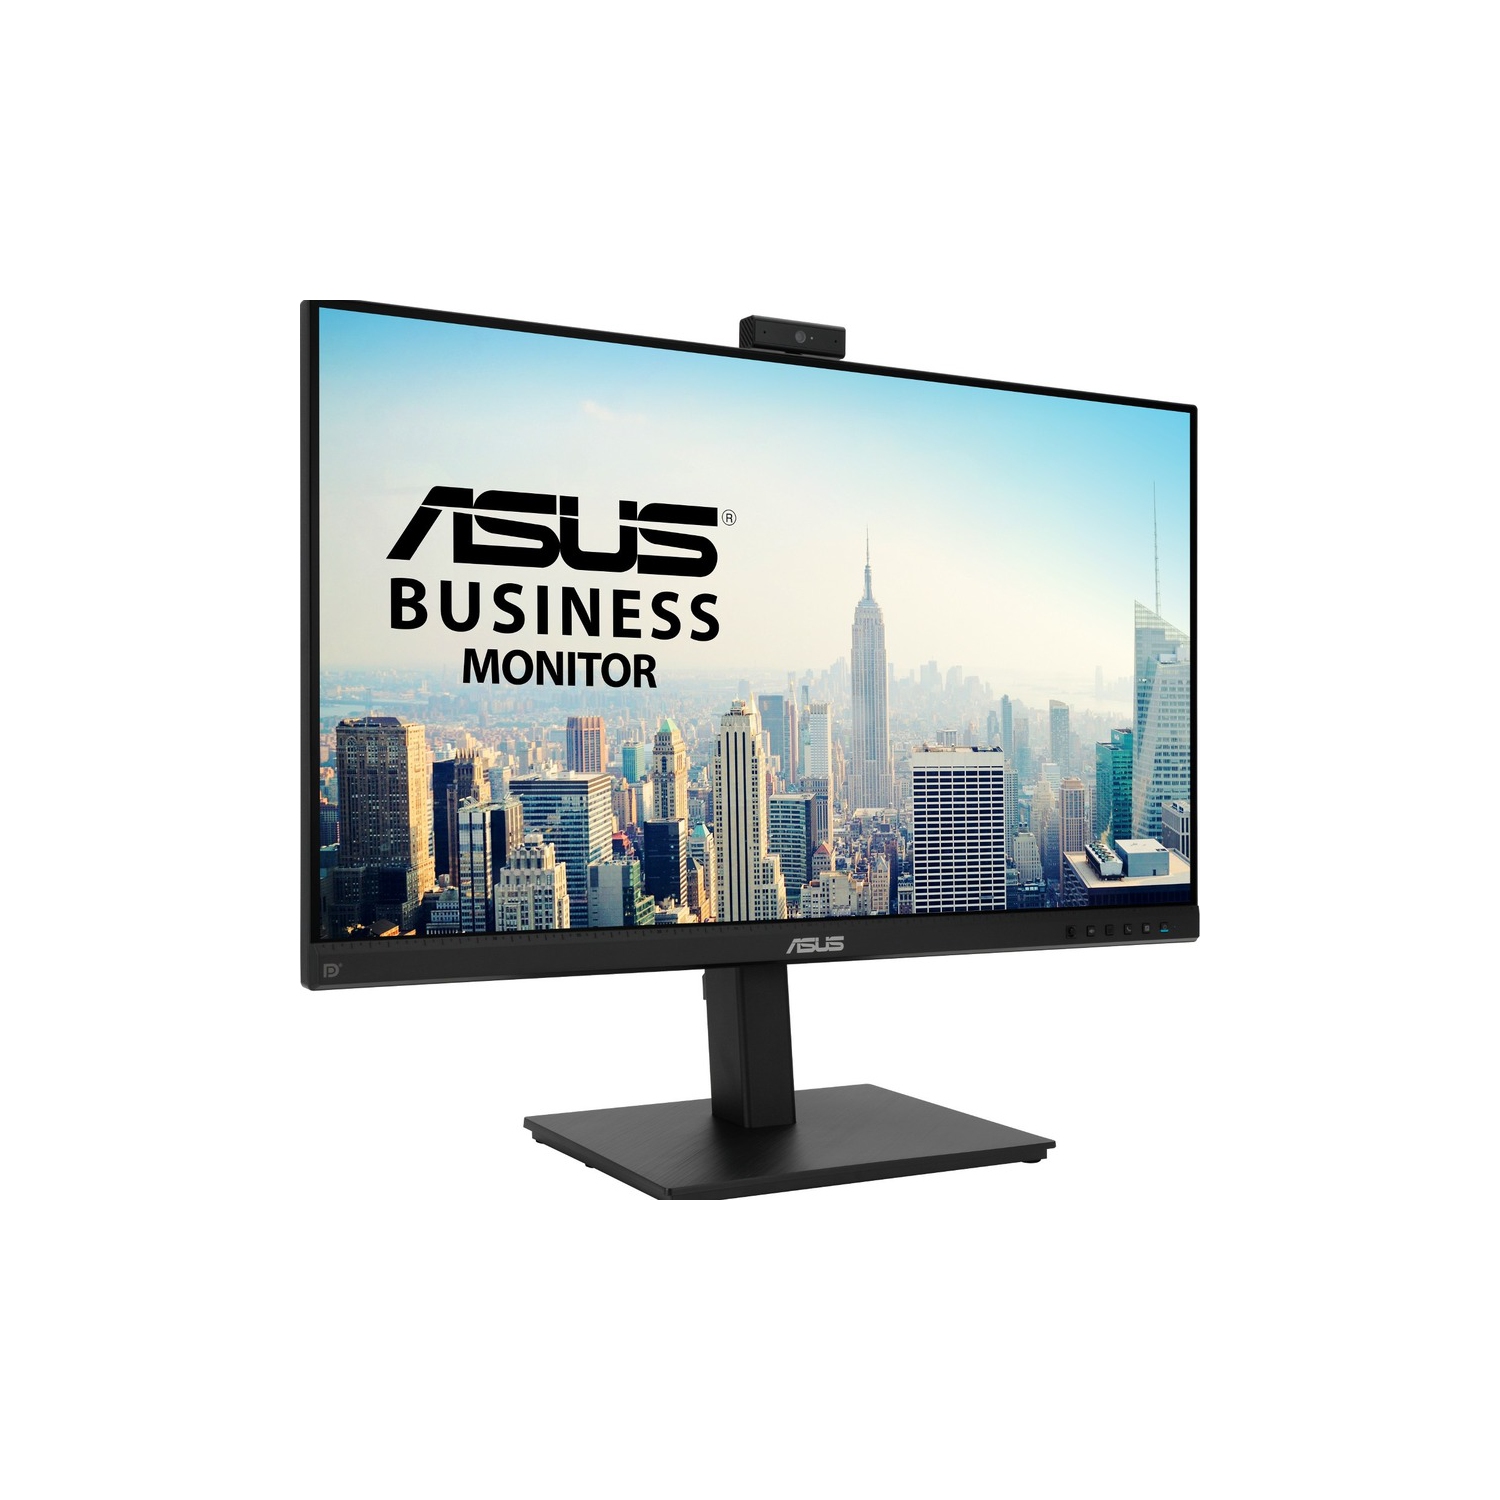 Asus BE279QSK 27" Full HD LED LCD Monitor with IPS Technology and USB Hub